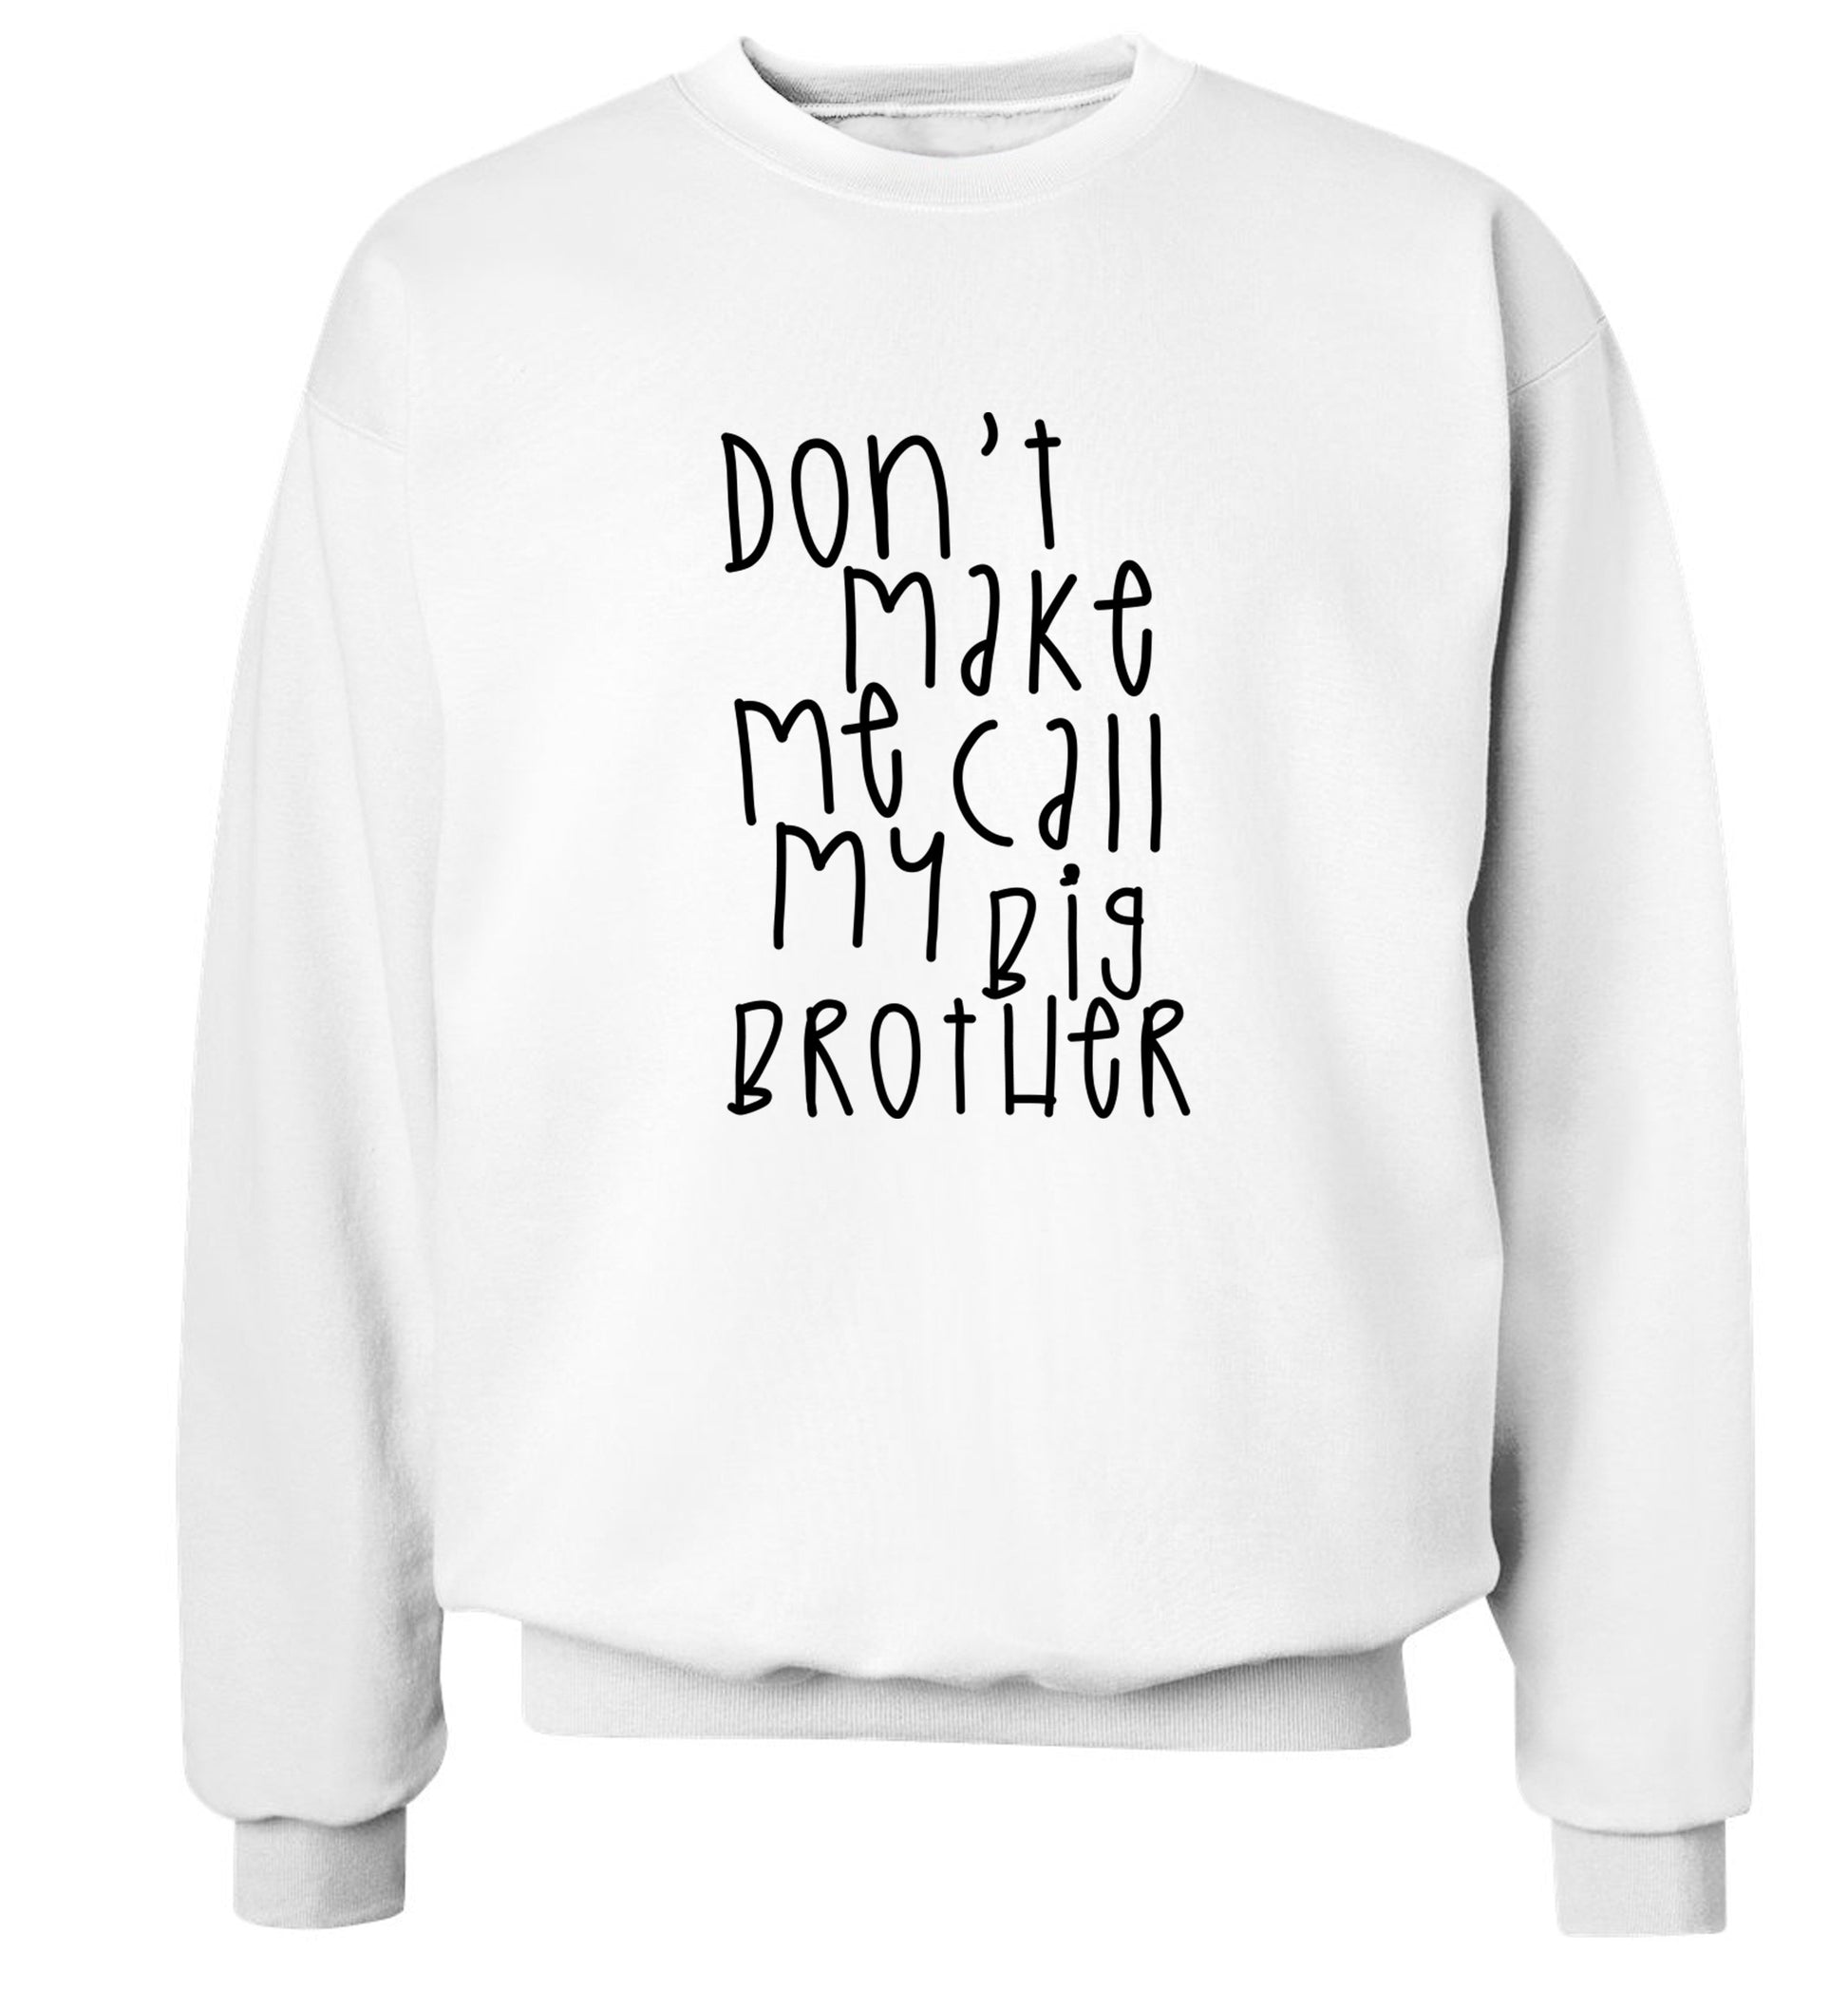 Don't make me call my big brother Adult's unisex white Sweater 2XL